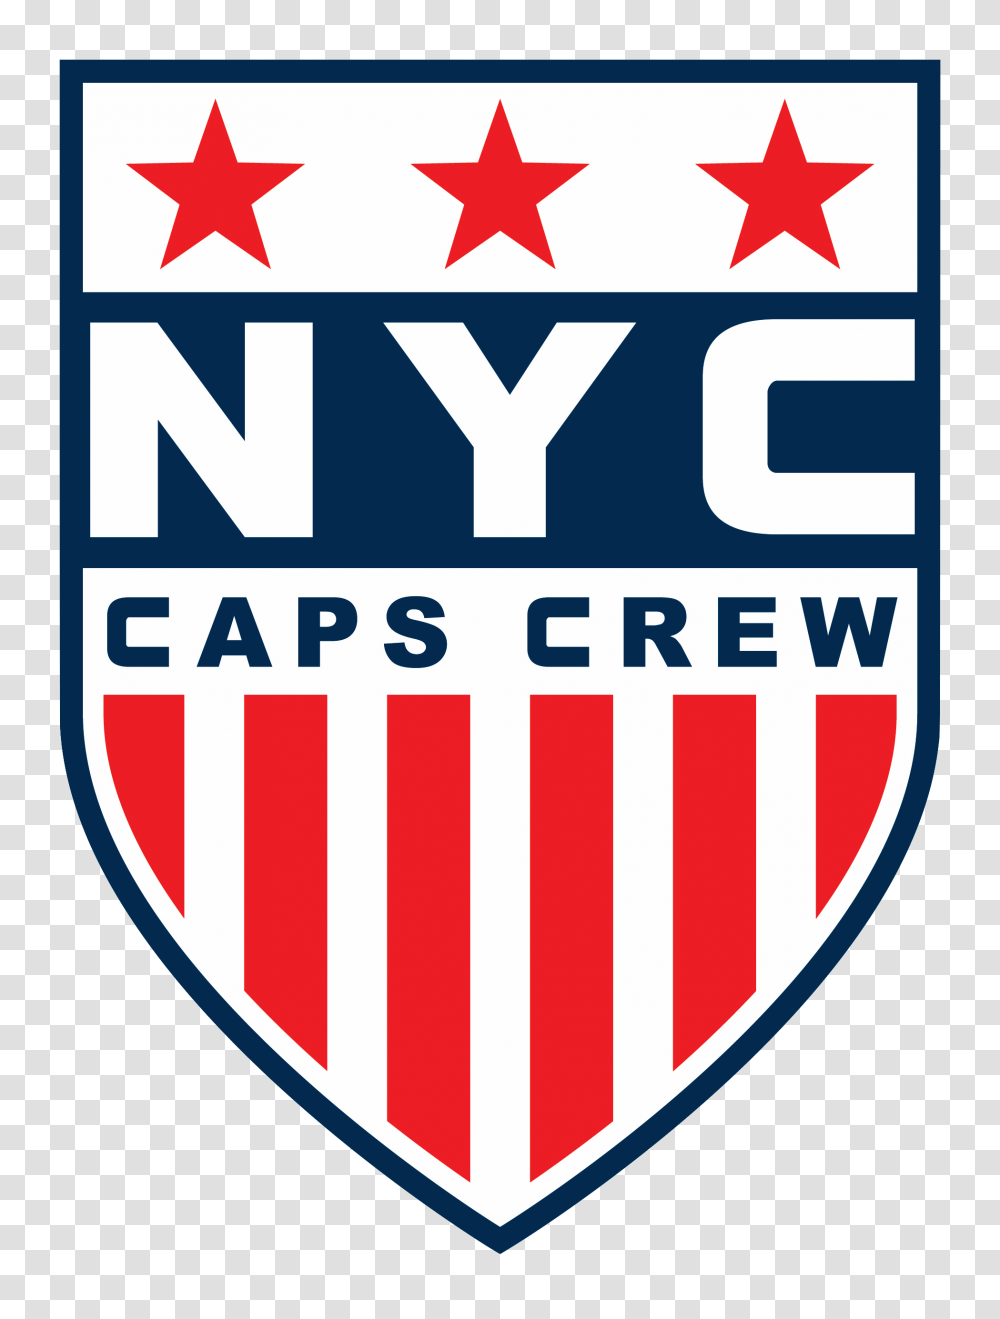 The Washington Capitals Are Stanley Cup Champions Nyc Caps Crew, Shield, Armor Transparent Png